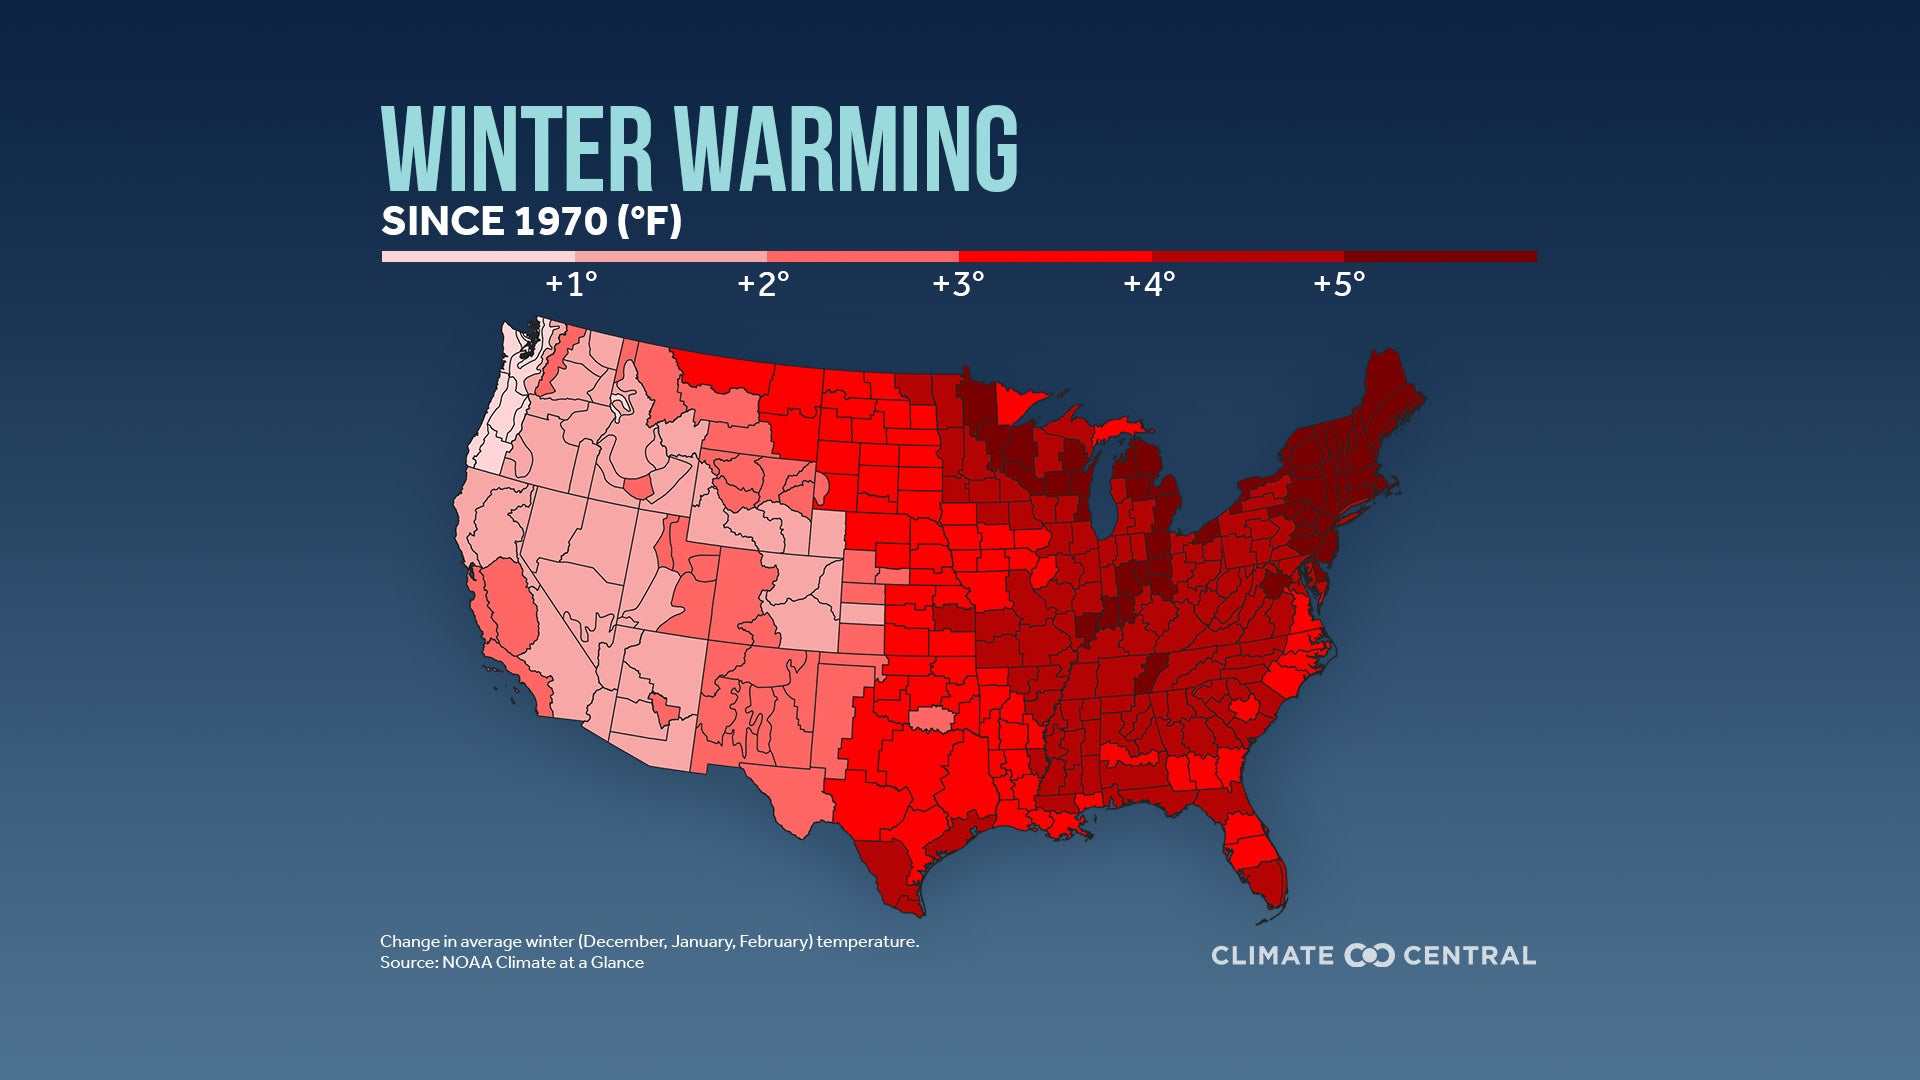 The climate crisis has impacted winter more than any other season across the United States